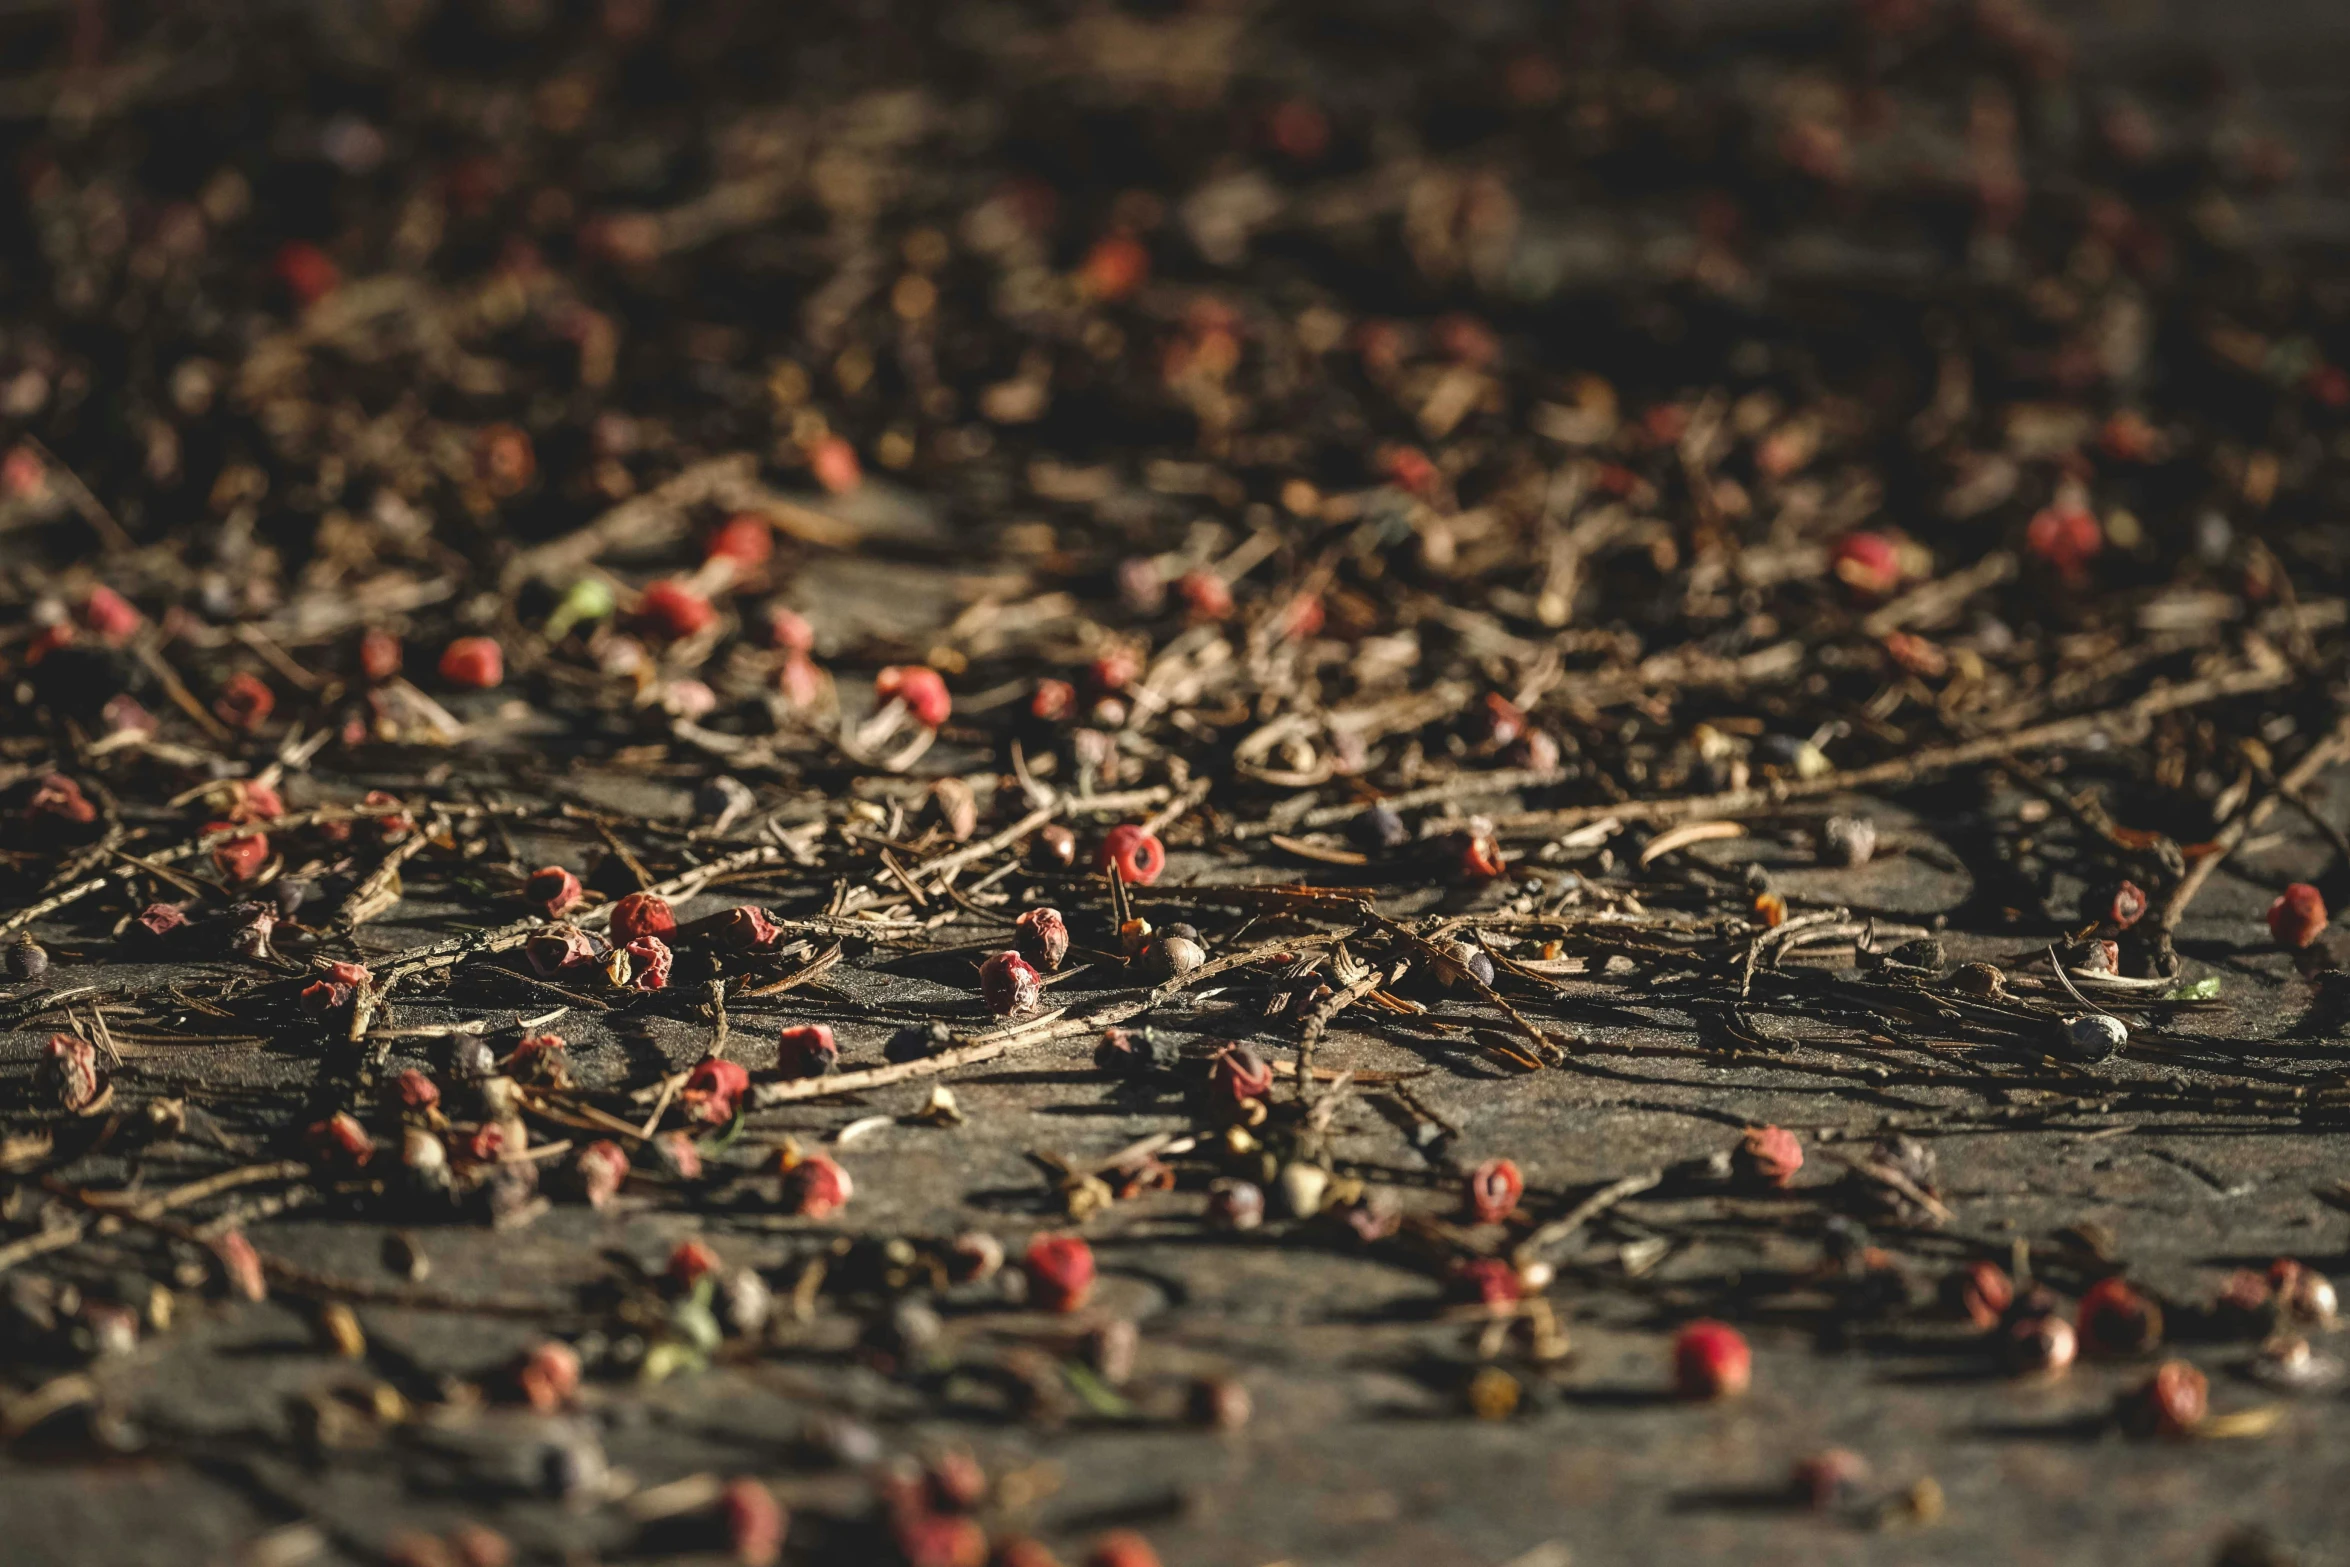 a bunch of small red berries on the ground, an album cover, unsplash, malt, swarming with insects, alessio albi, organics